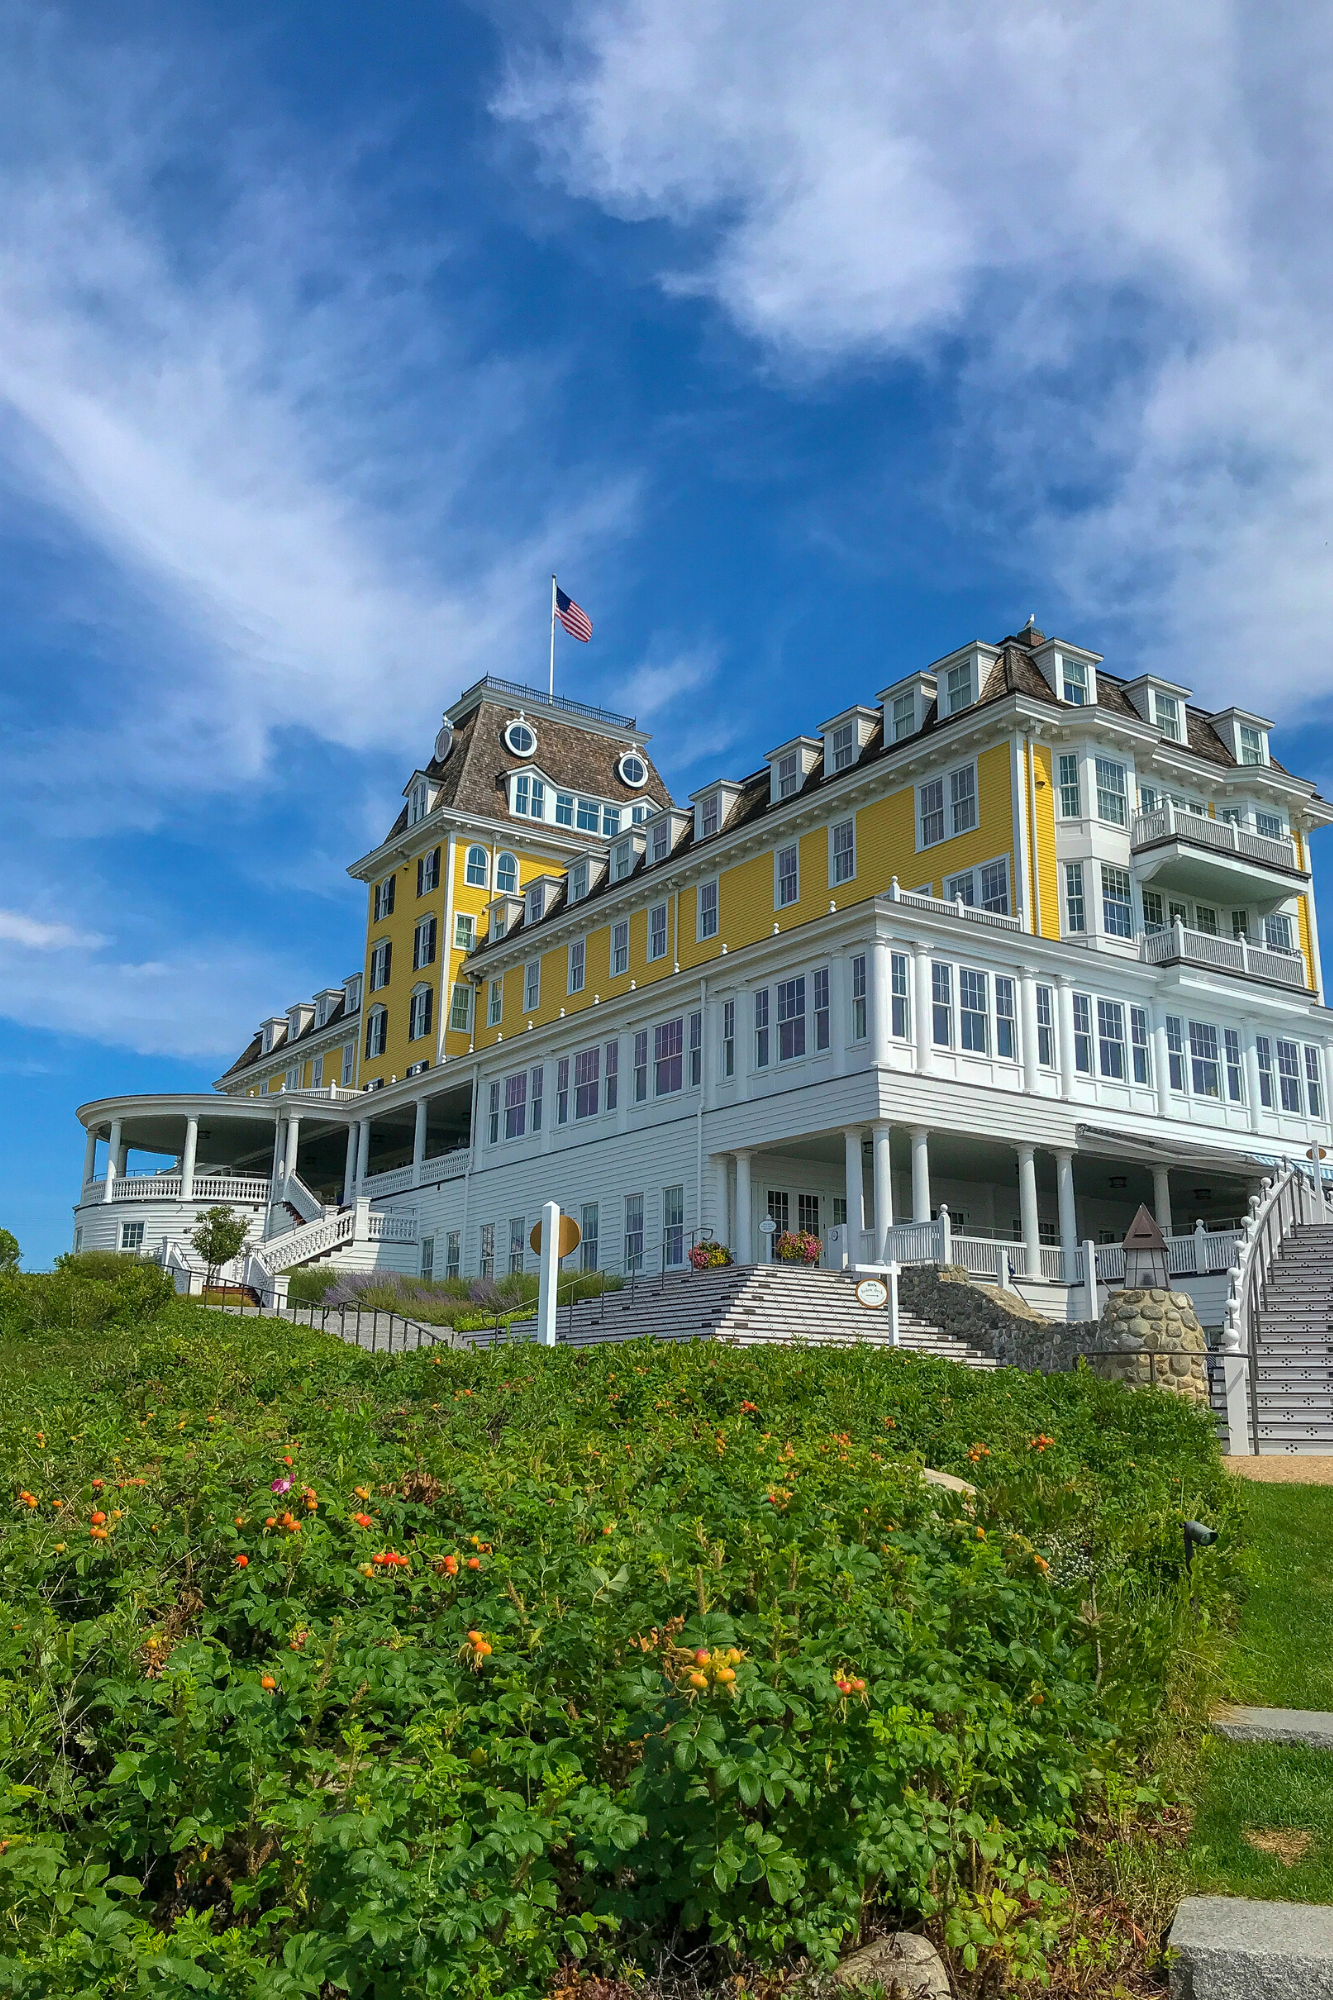 Ocean House in Watch Hill Rhode Island is a luxurious Relais and Chateaux property with stunning water views and landscape